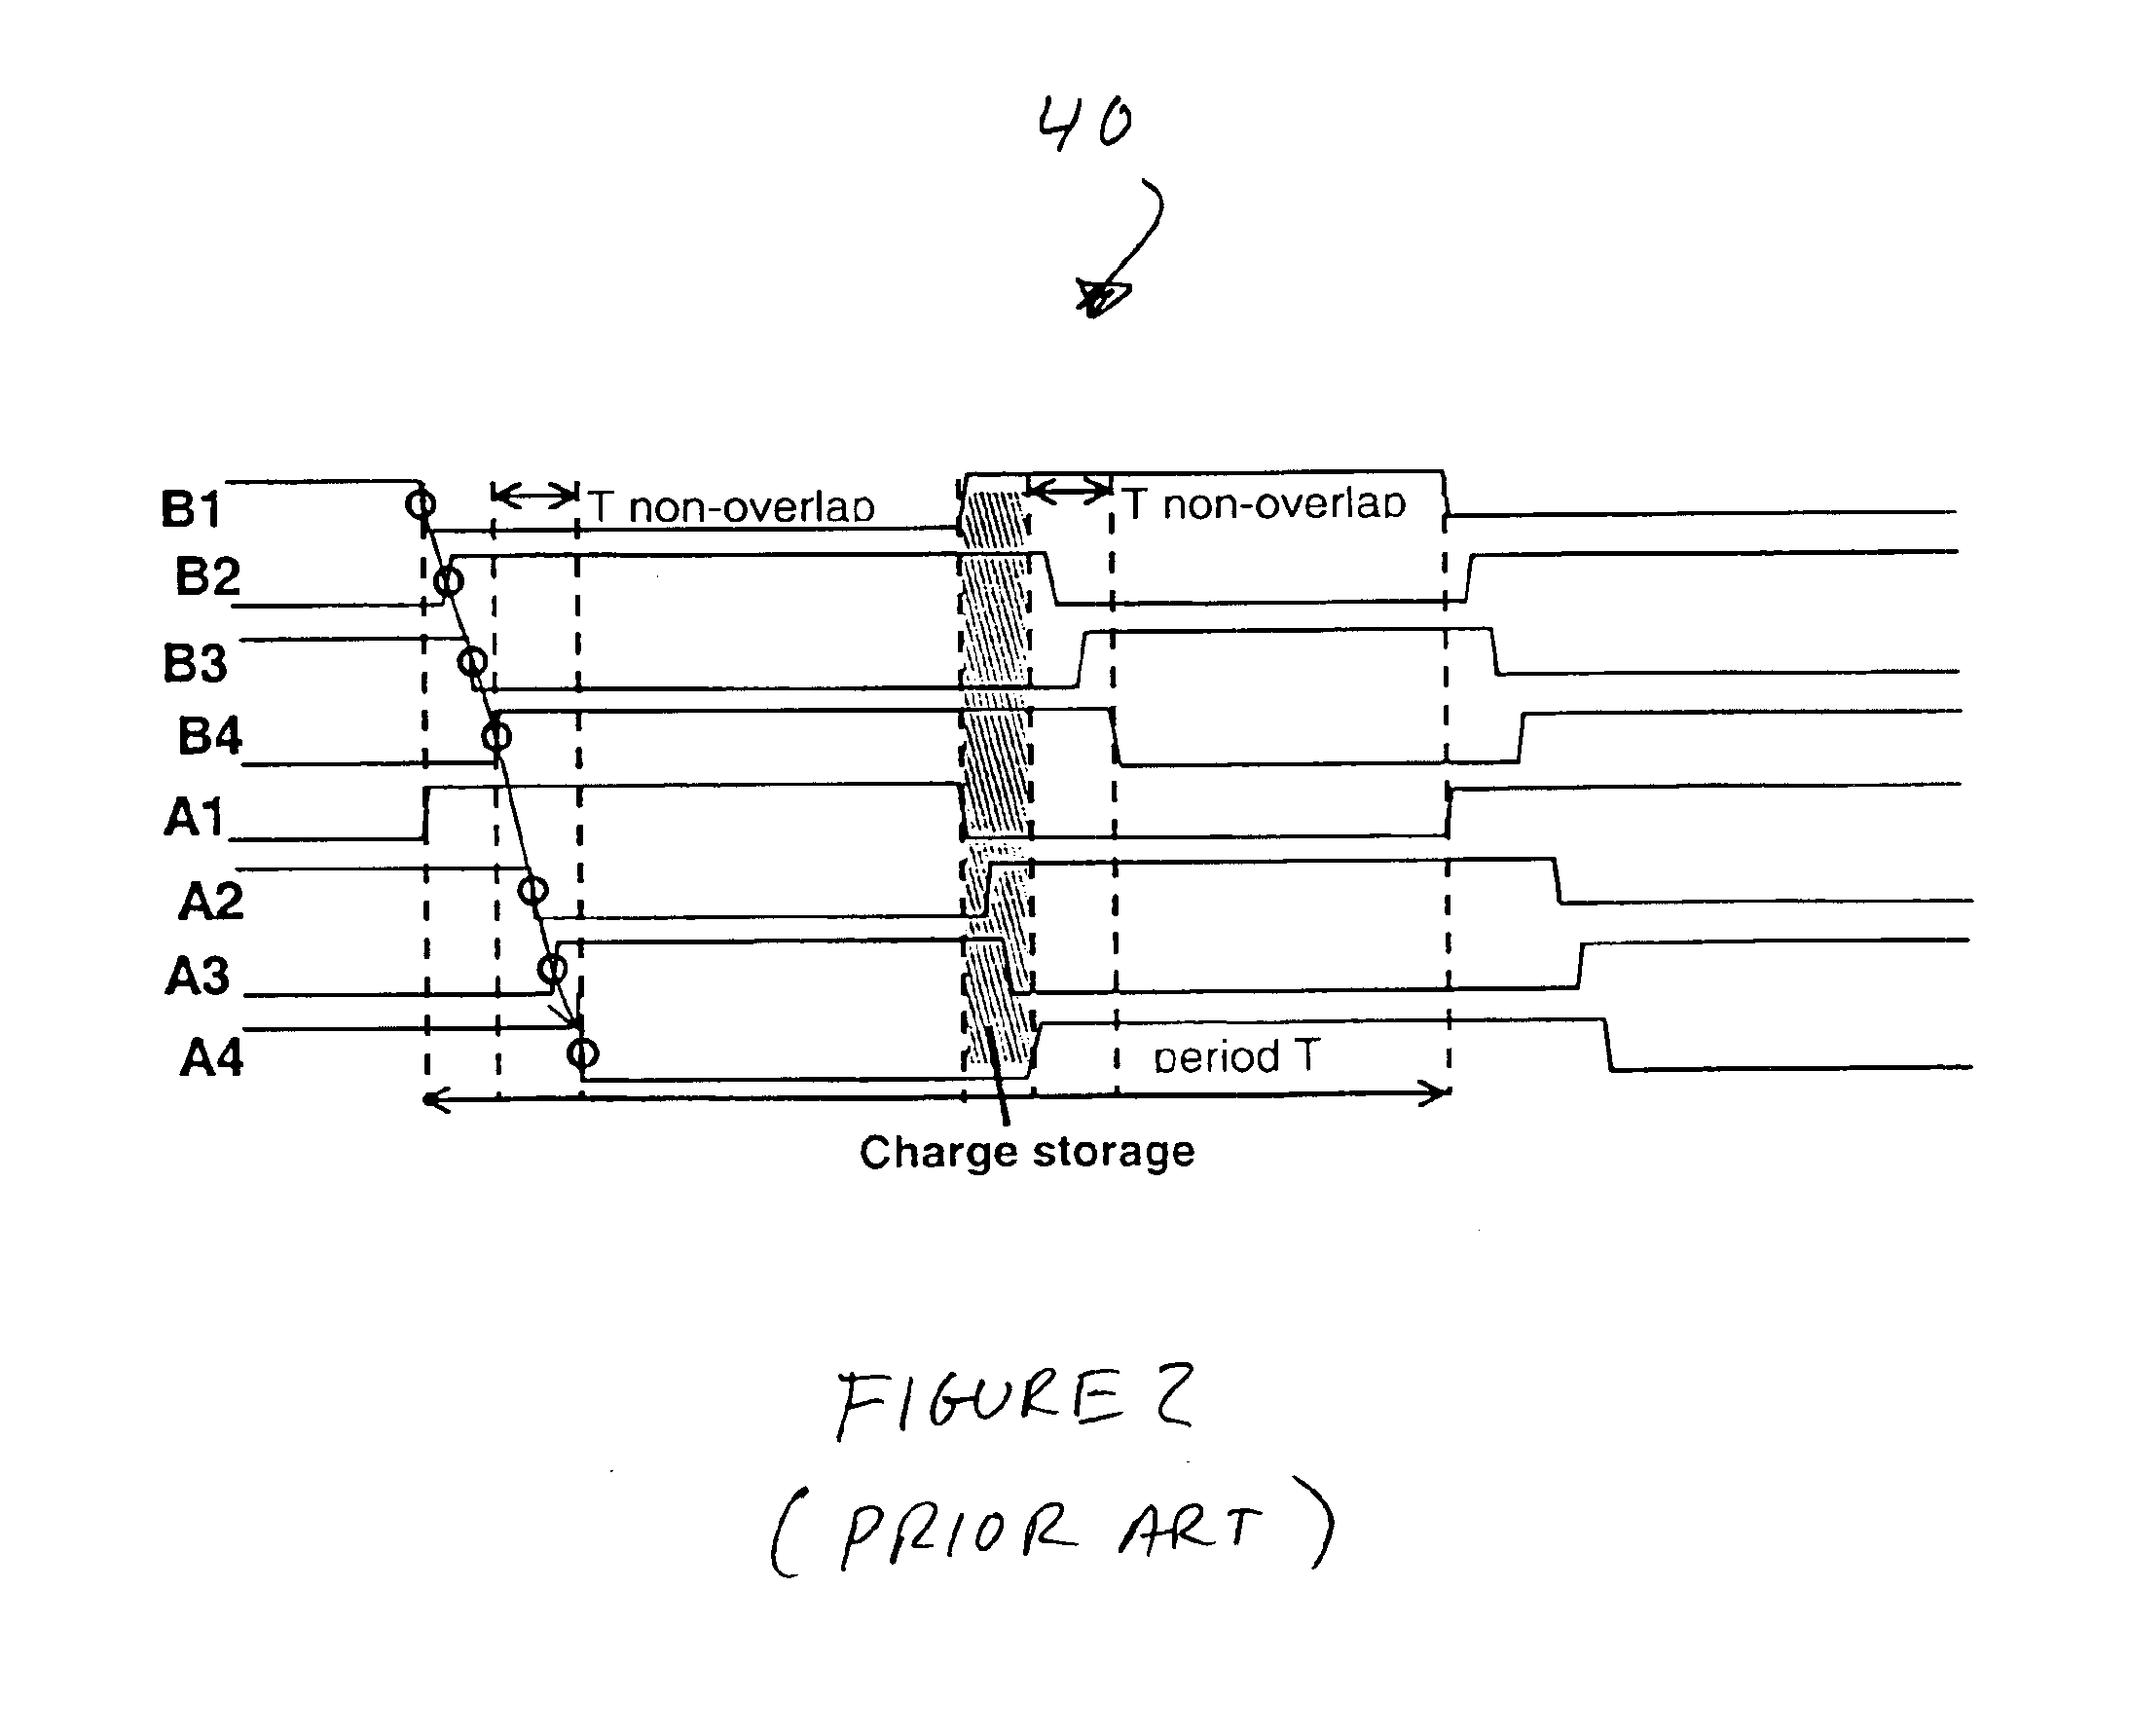 Three-transistor NAND and NOR gates for two-phase clock generators